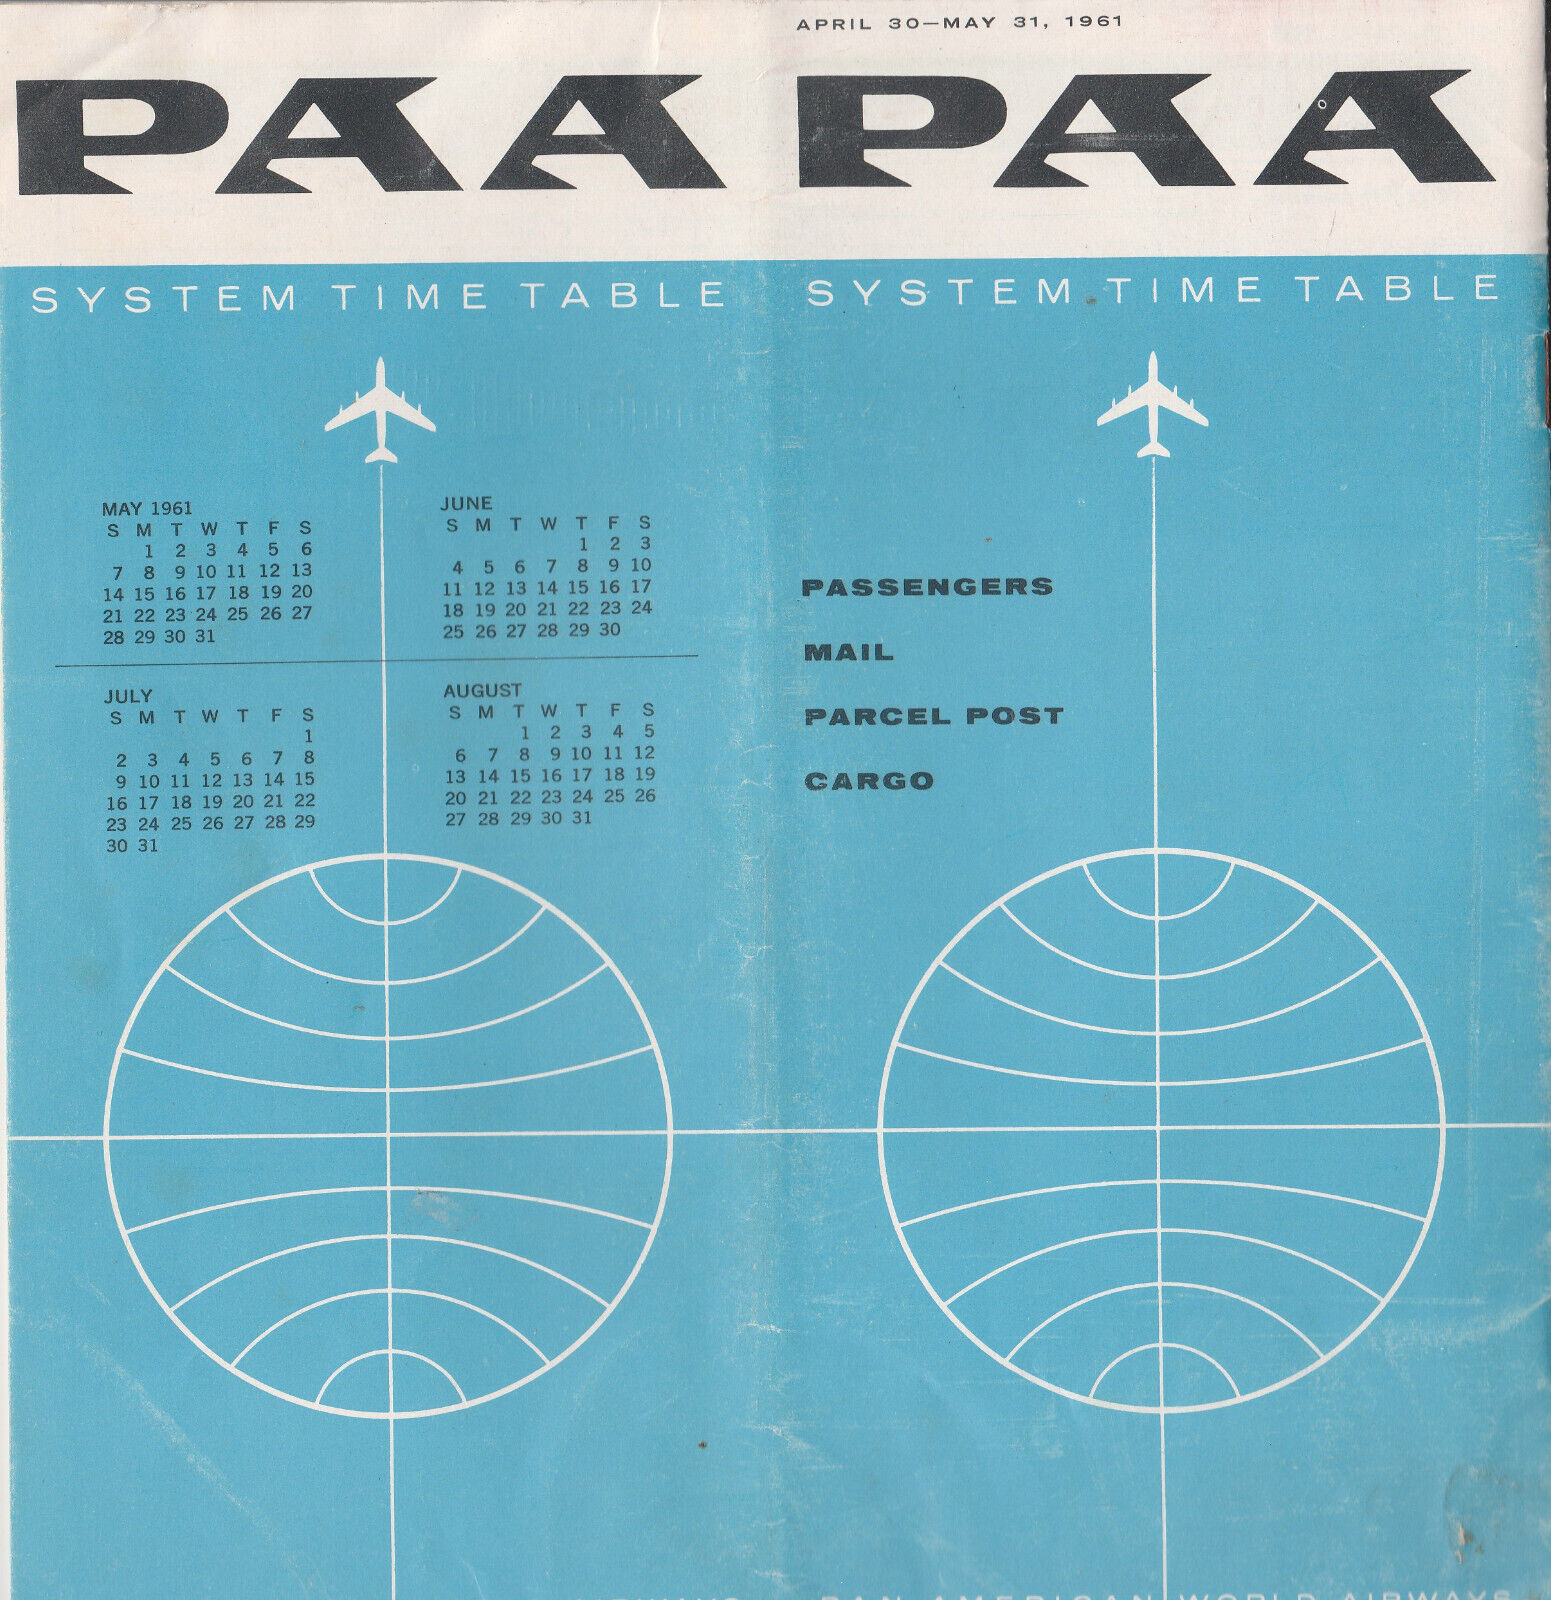 PAN AM US airline 1961 system timetable